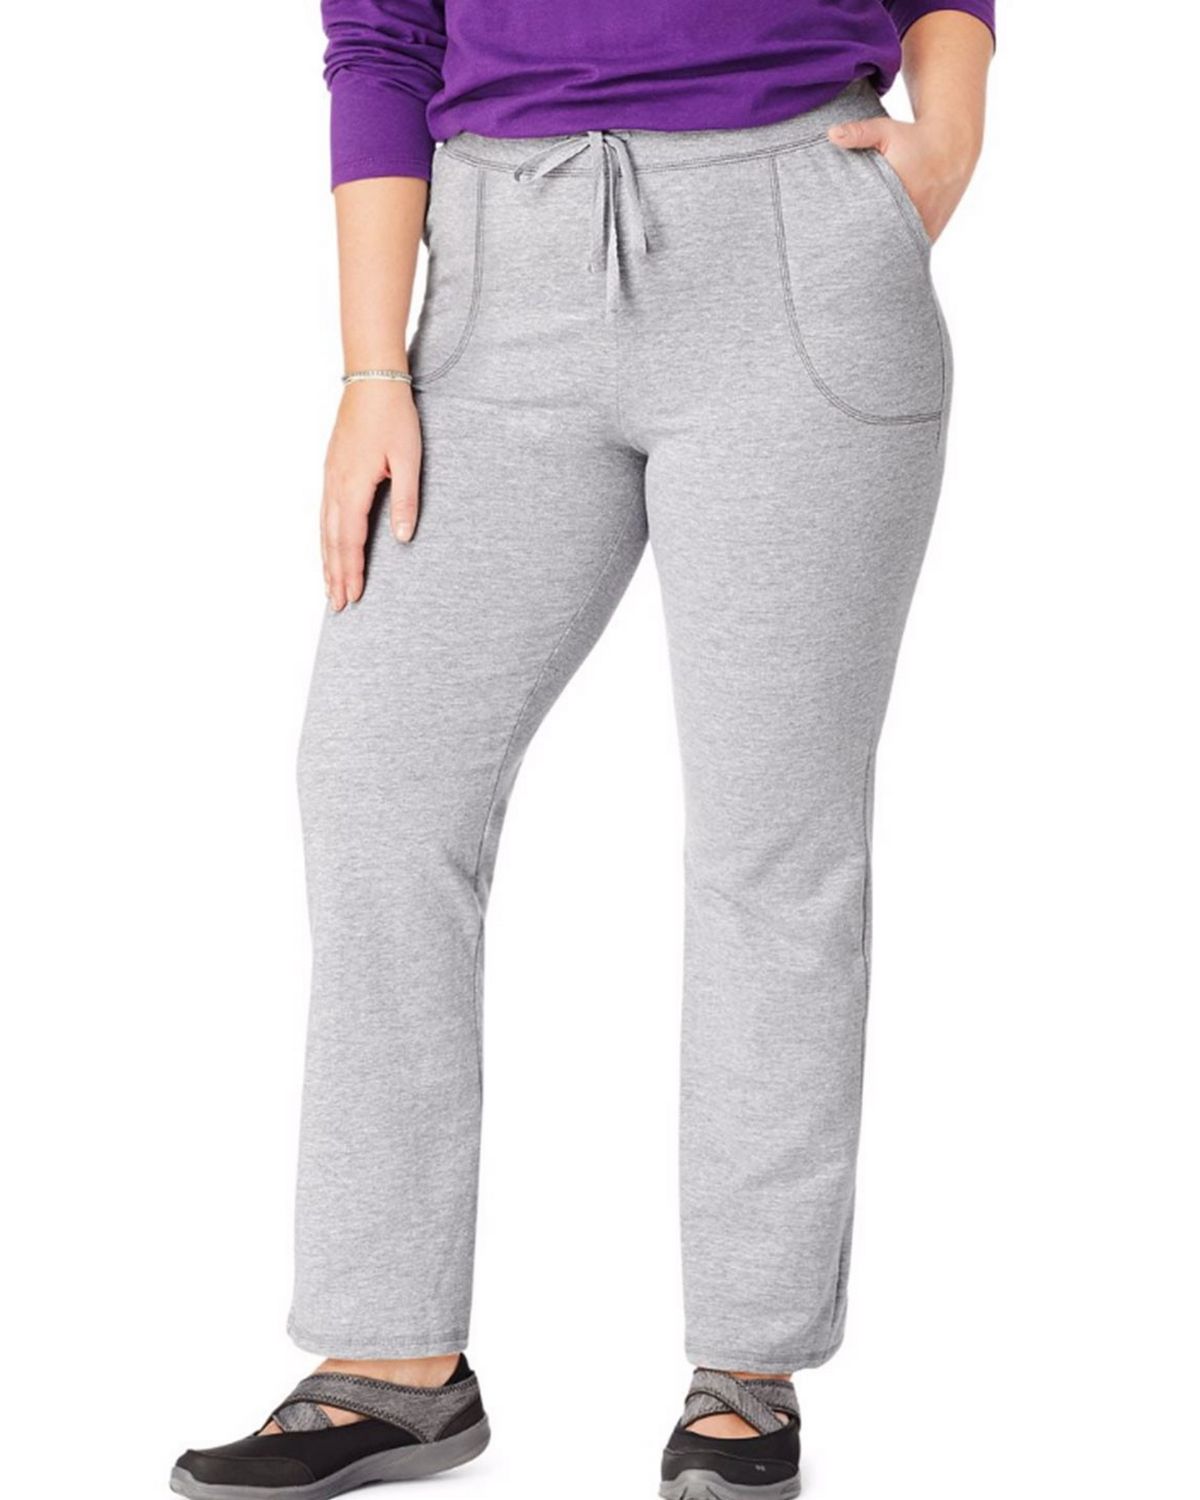 just my size women's twill pants